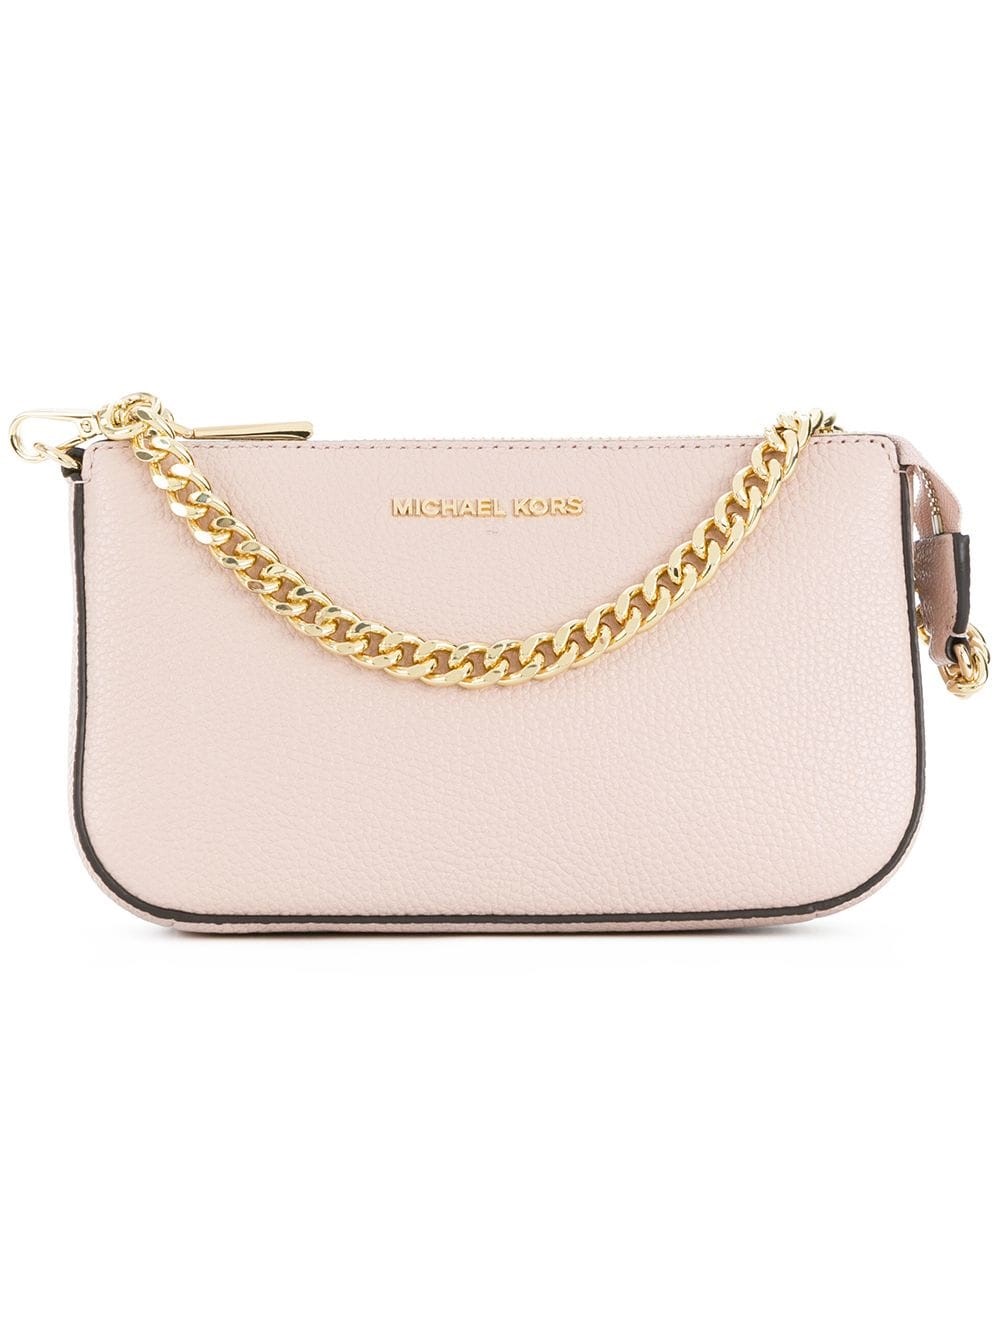 michael kors mk CLUTCH BAG available on  - 28887